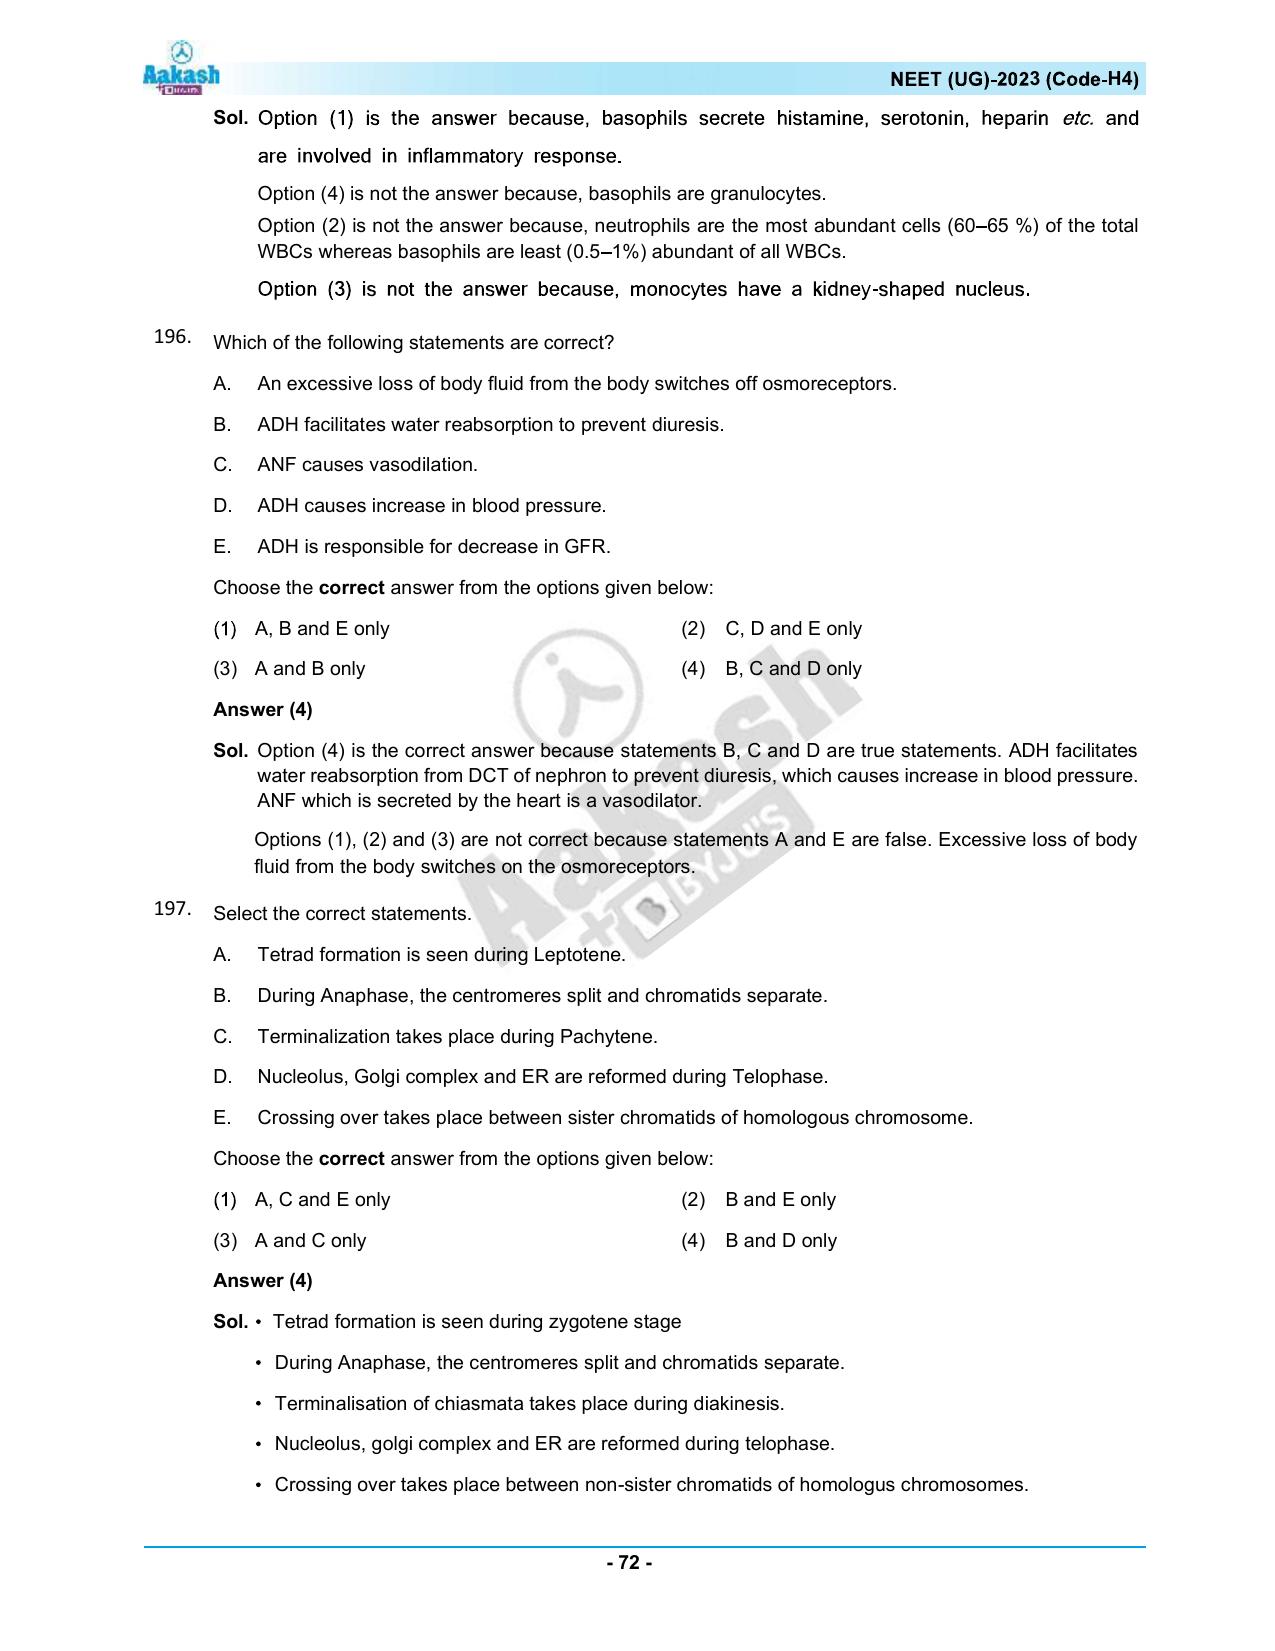 NEET 2023 Question Paper H4 - Page 72